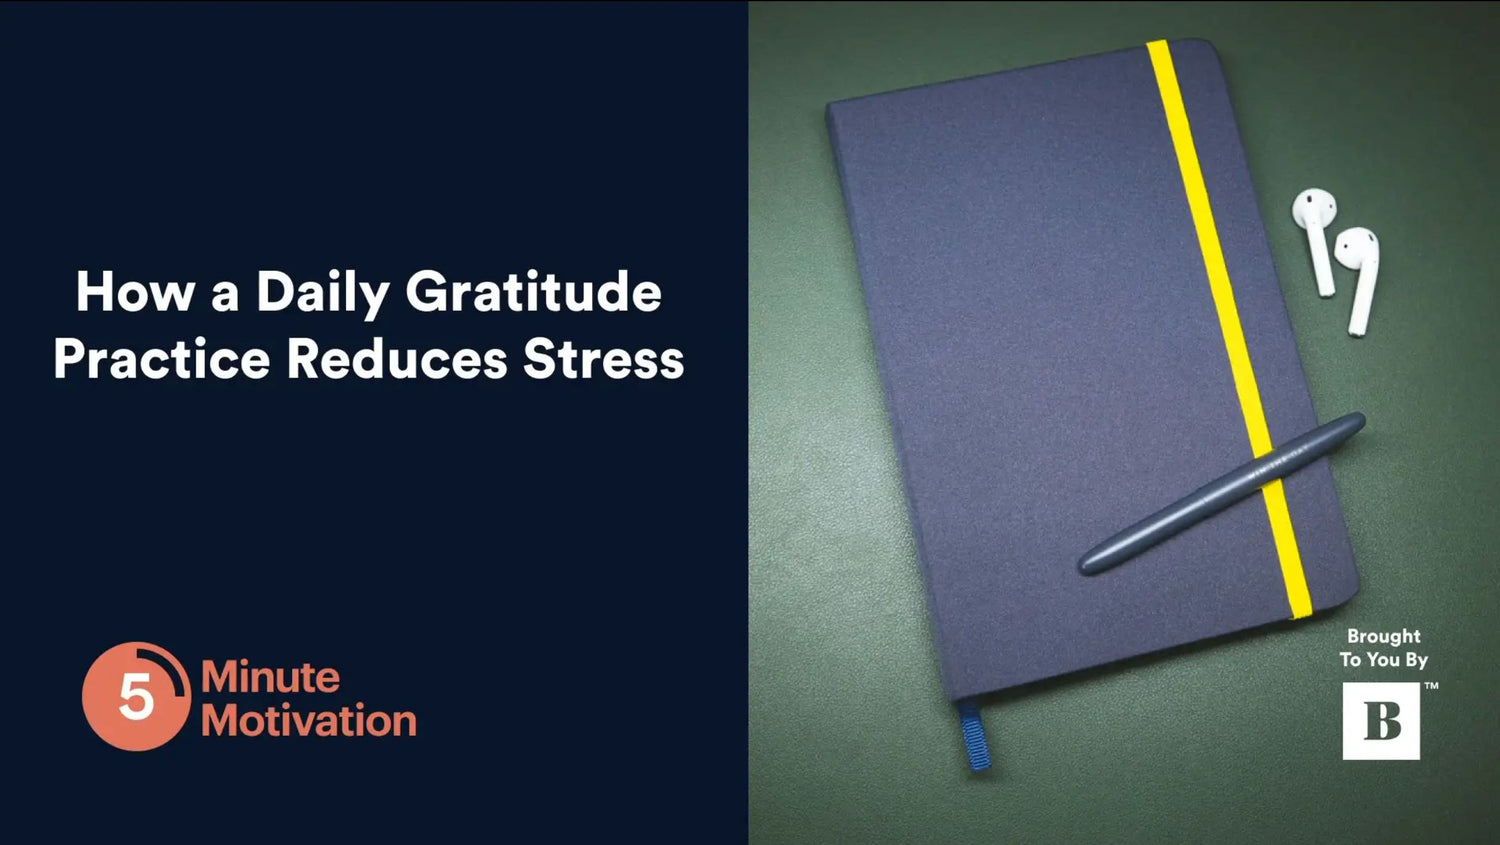 How a Daily Gratitude Practice Reduces Stress